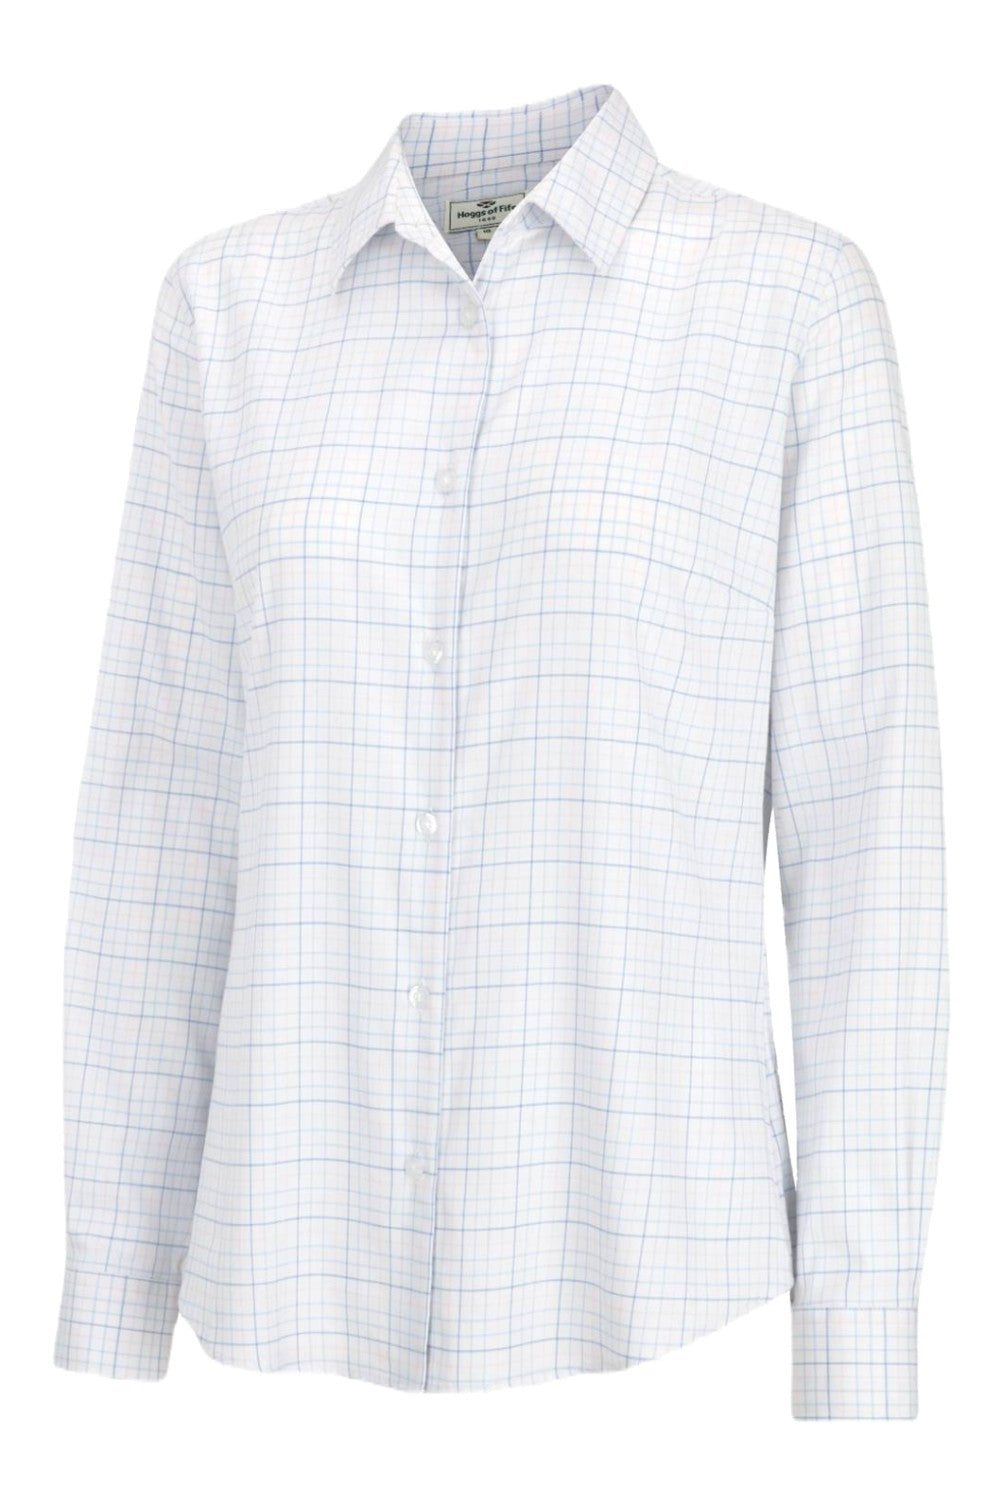 Hoggs of Fife Callie Twill Ladies Check Shirt in White/Pink/Blue 